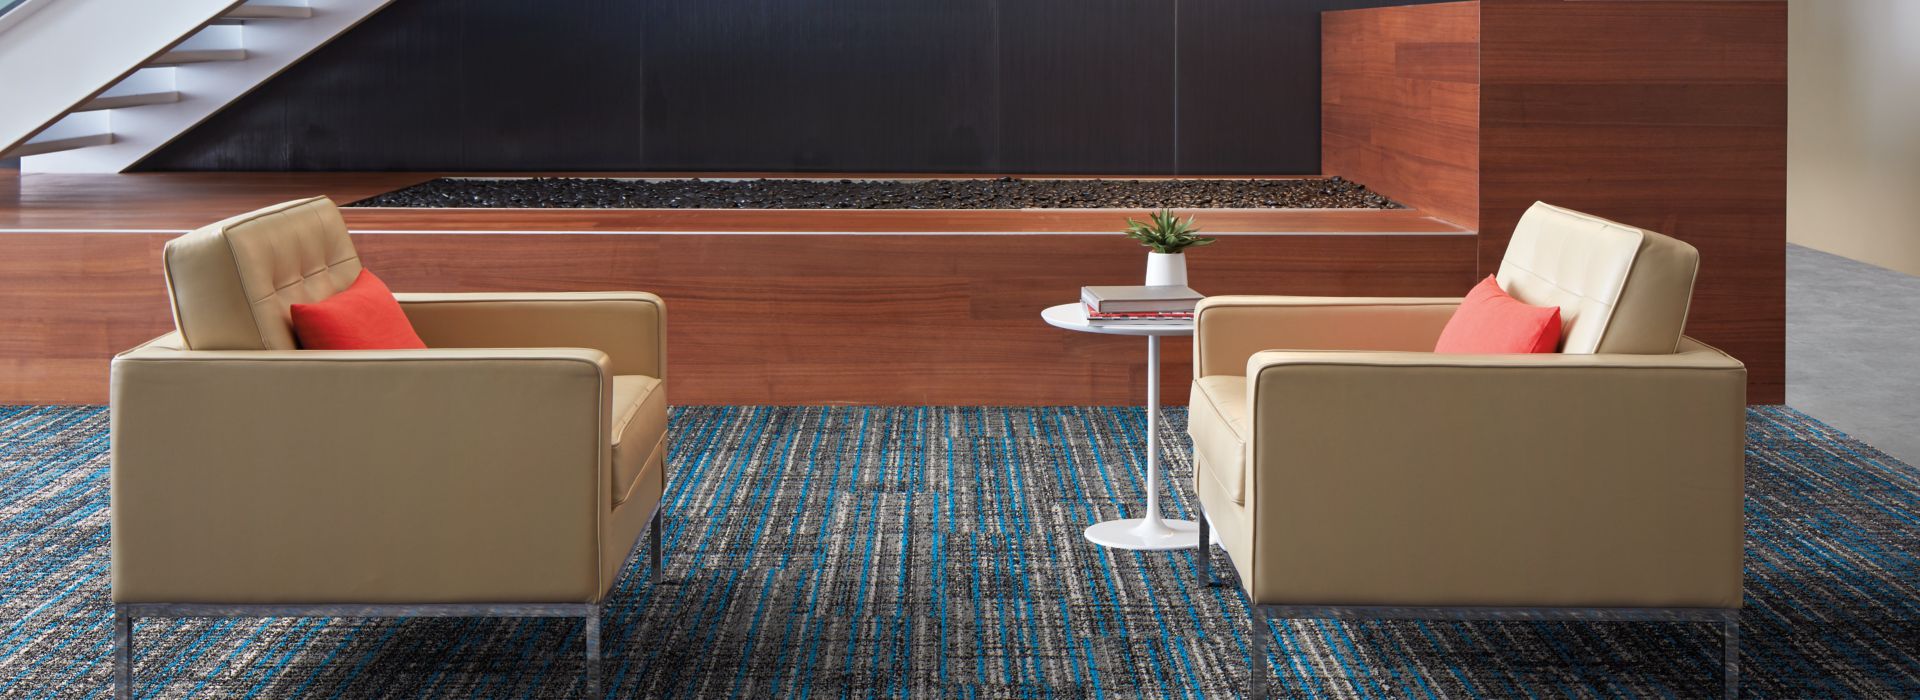 Interface Upload carpet tile and Textured Stones LVT in lobby area with couches